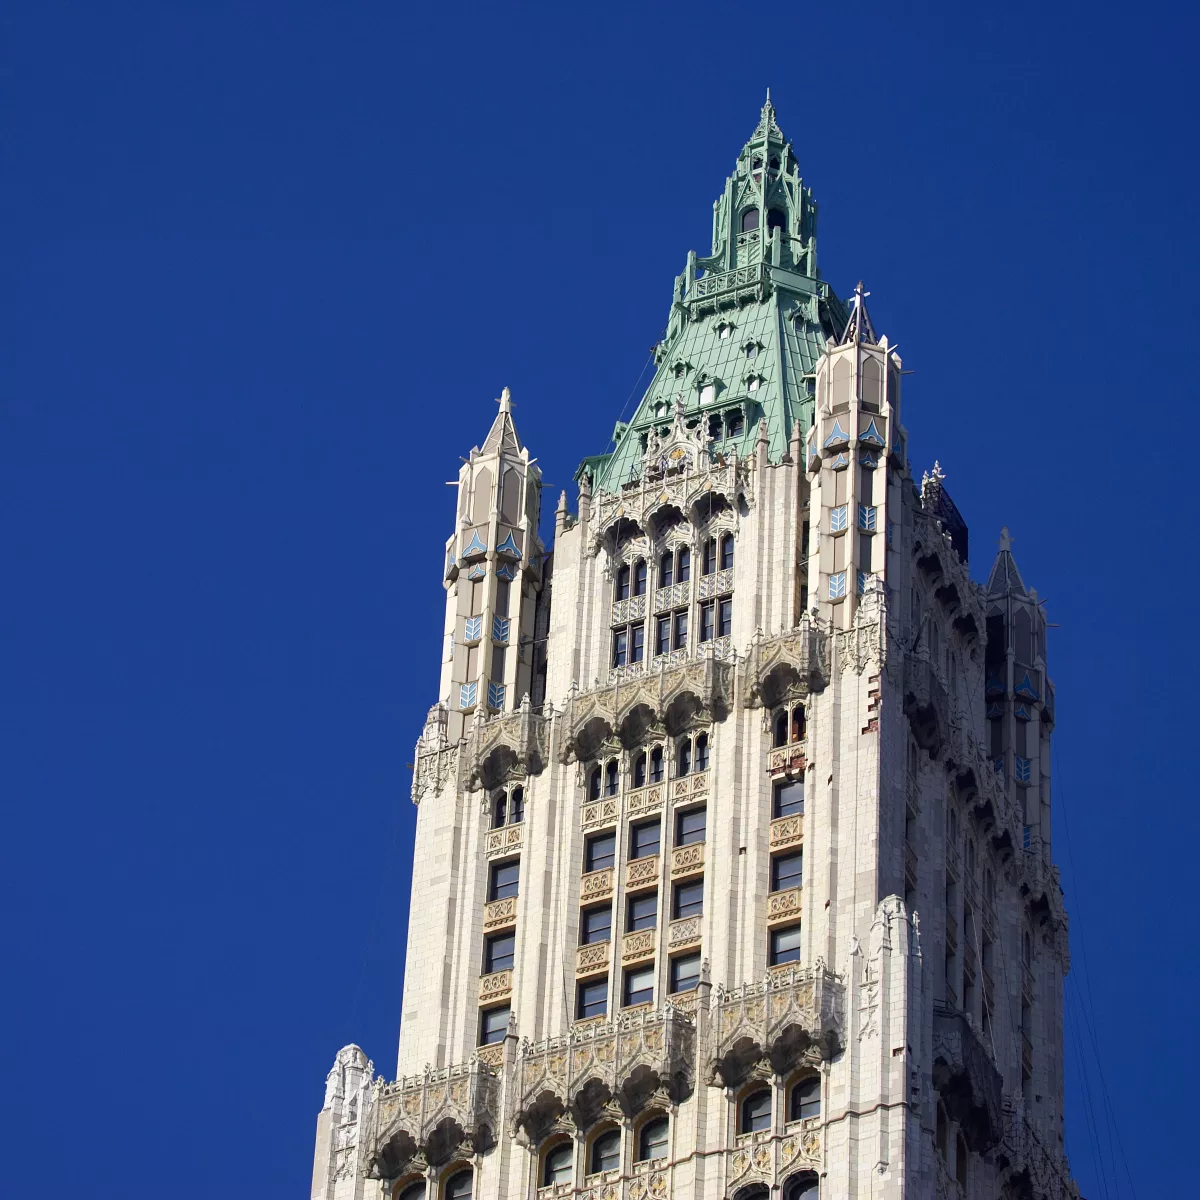 Who Was The Architect Of The Woolworth Building? What Was The Final Cost Of The Building?